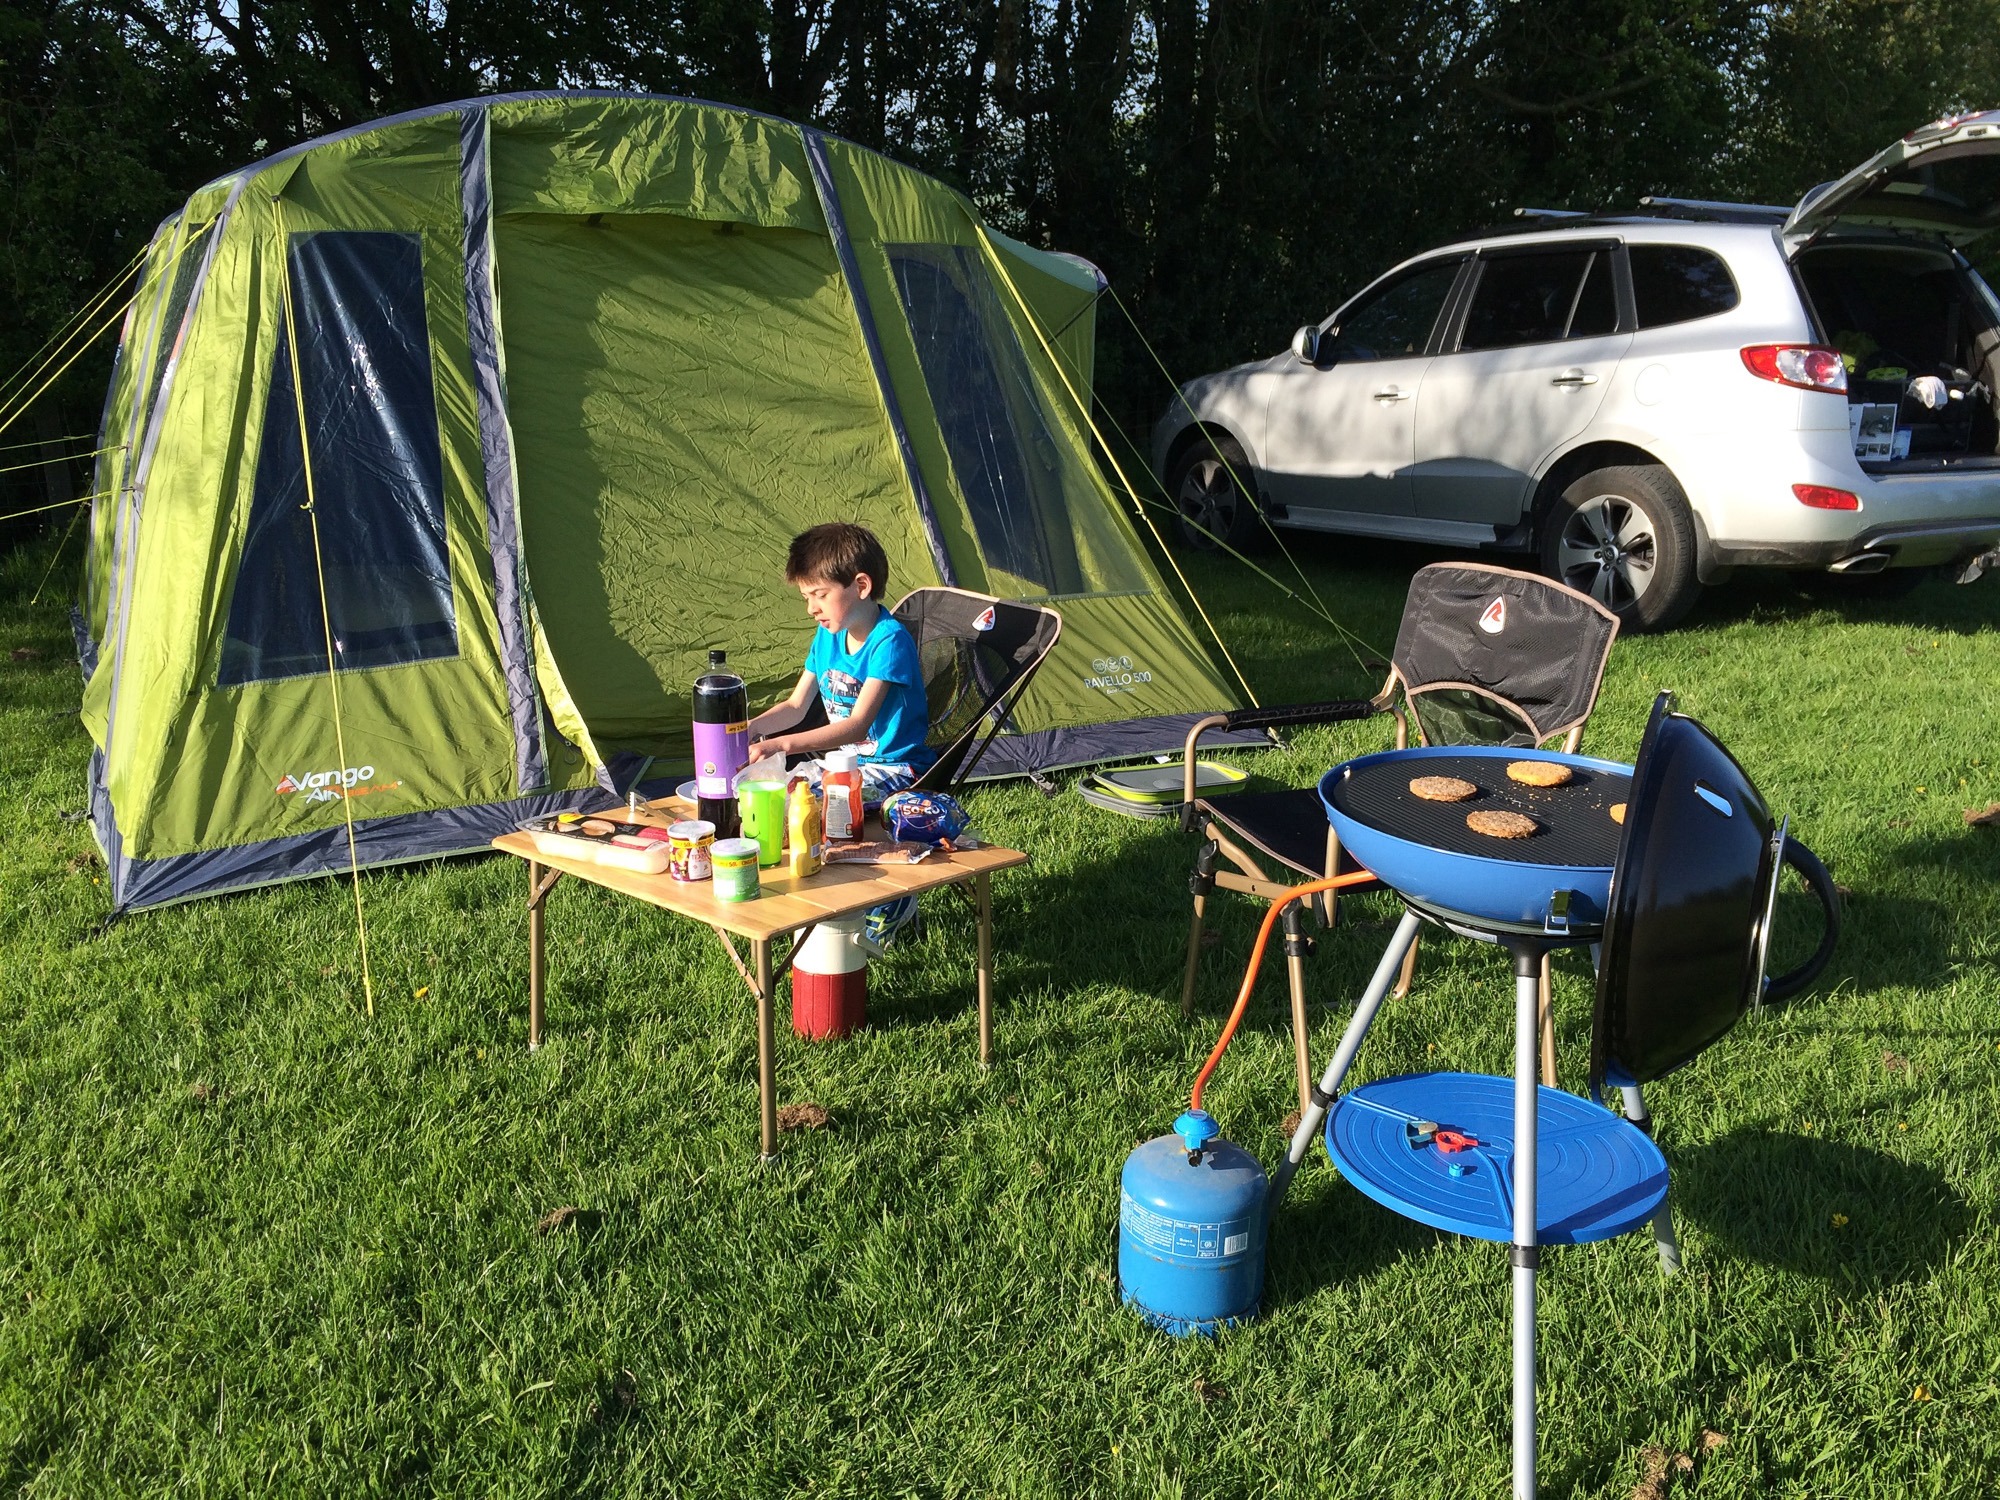 Simple weekend camping in the sunshine